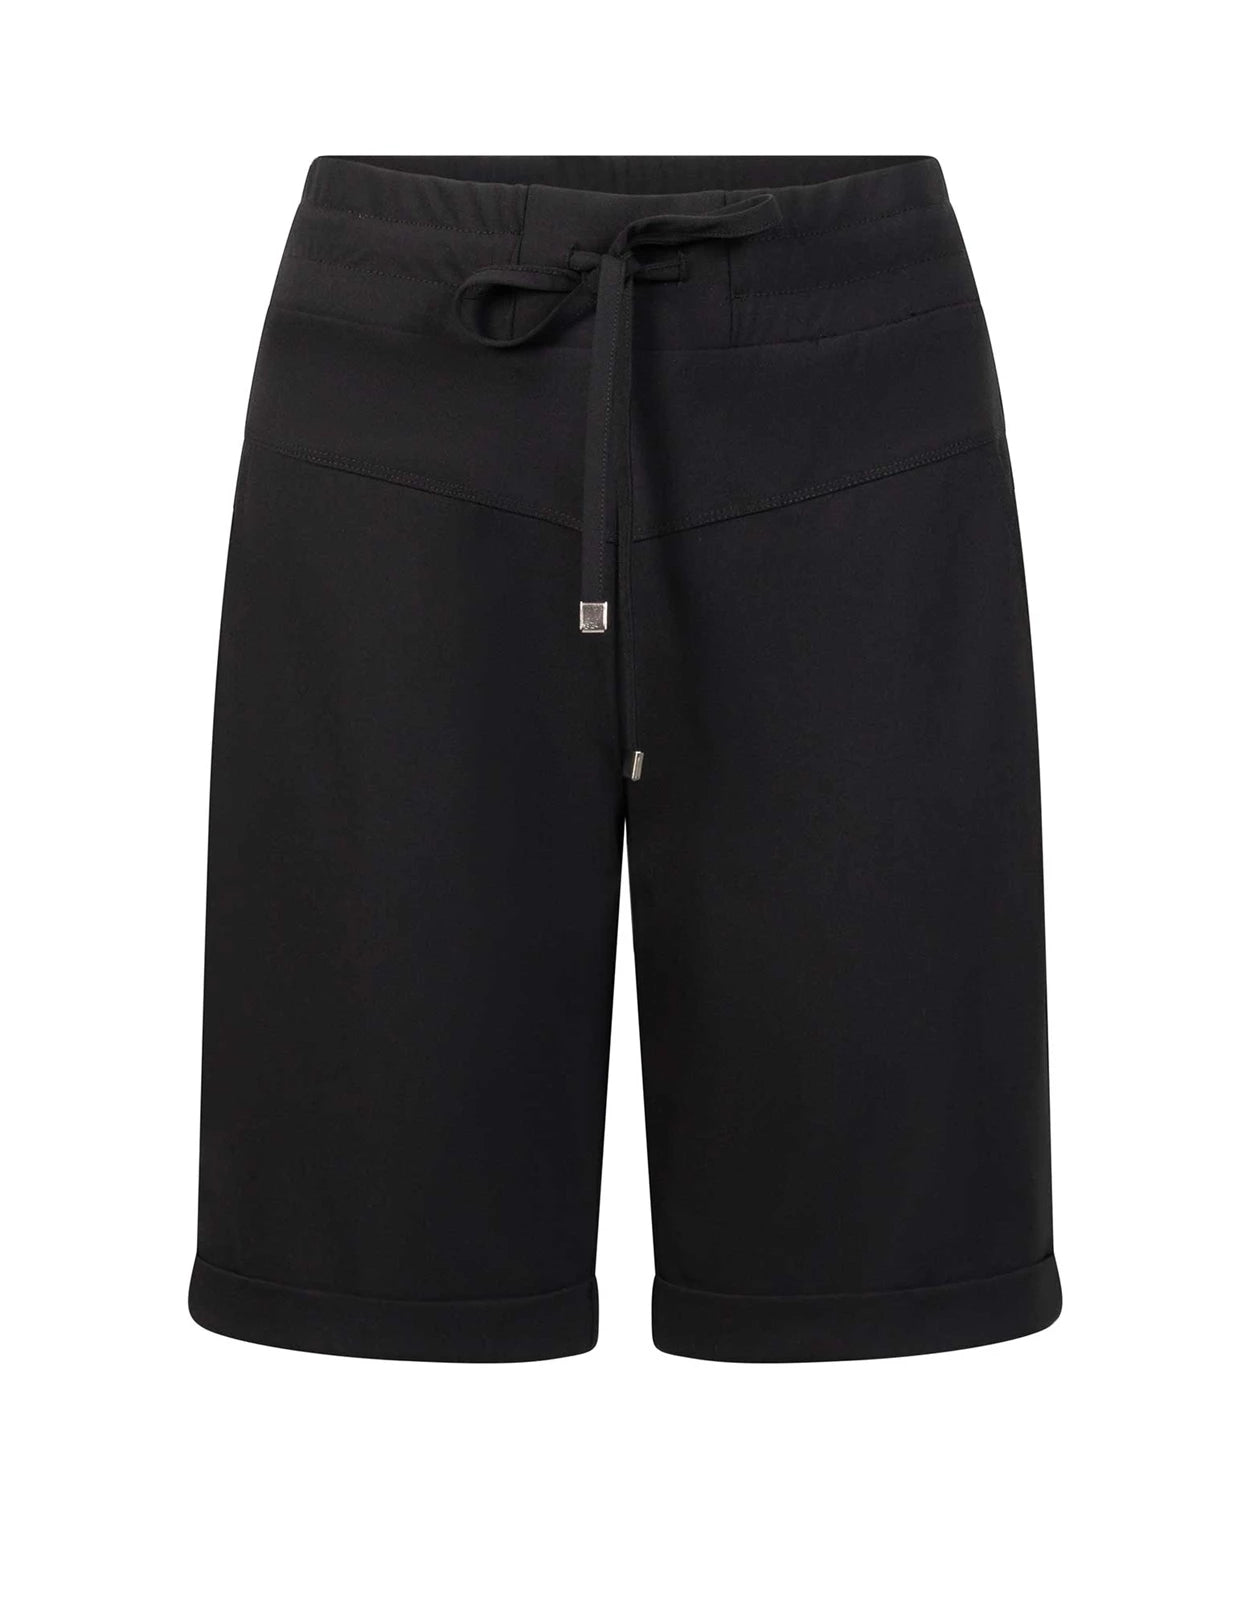 Bowie Travel Shorts in Black